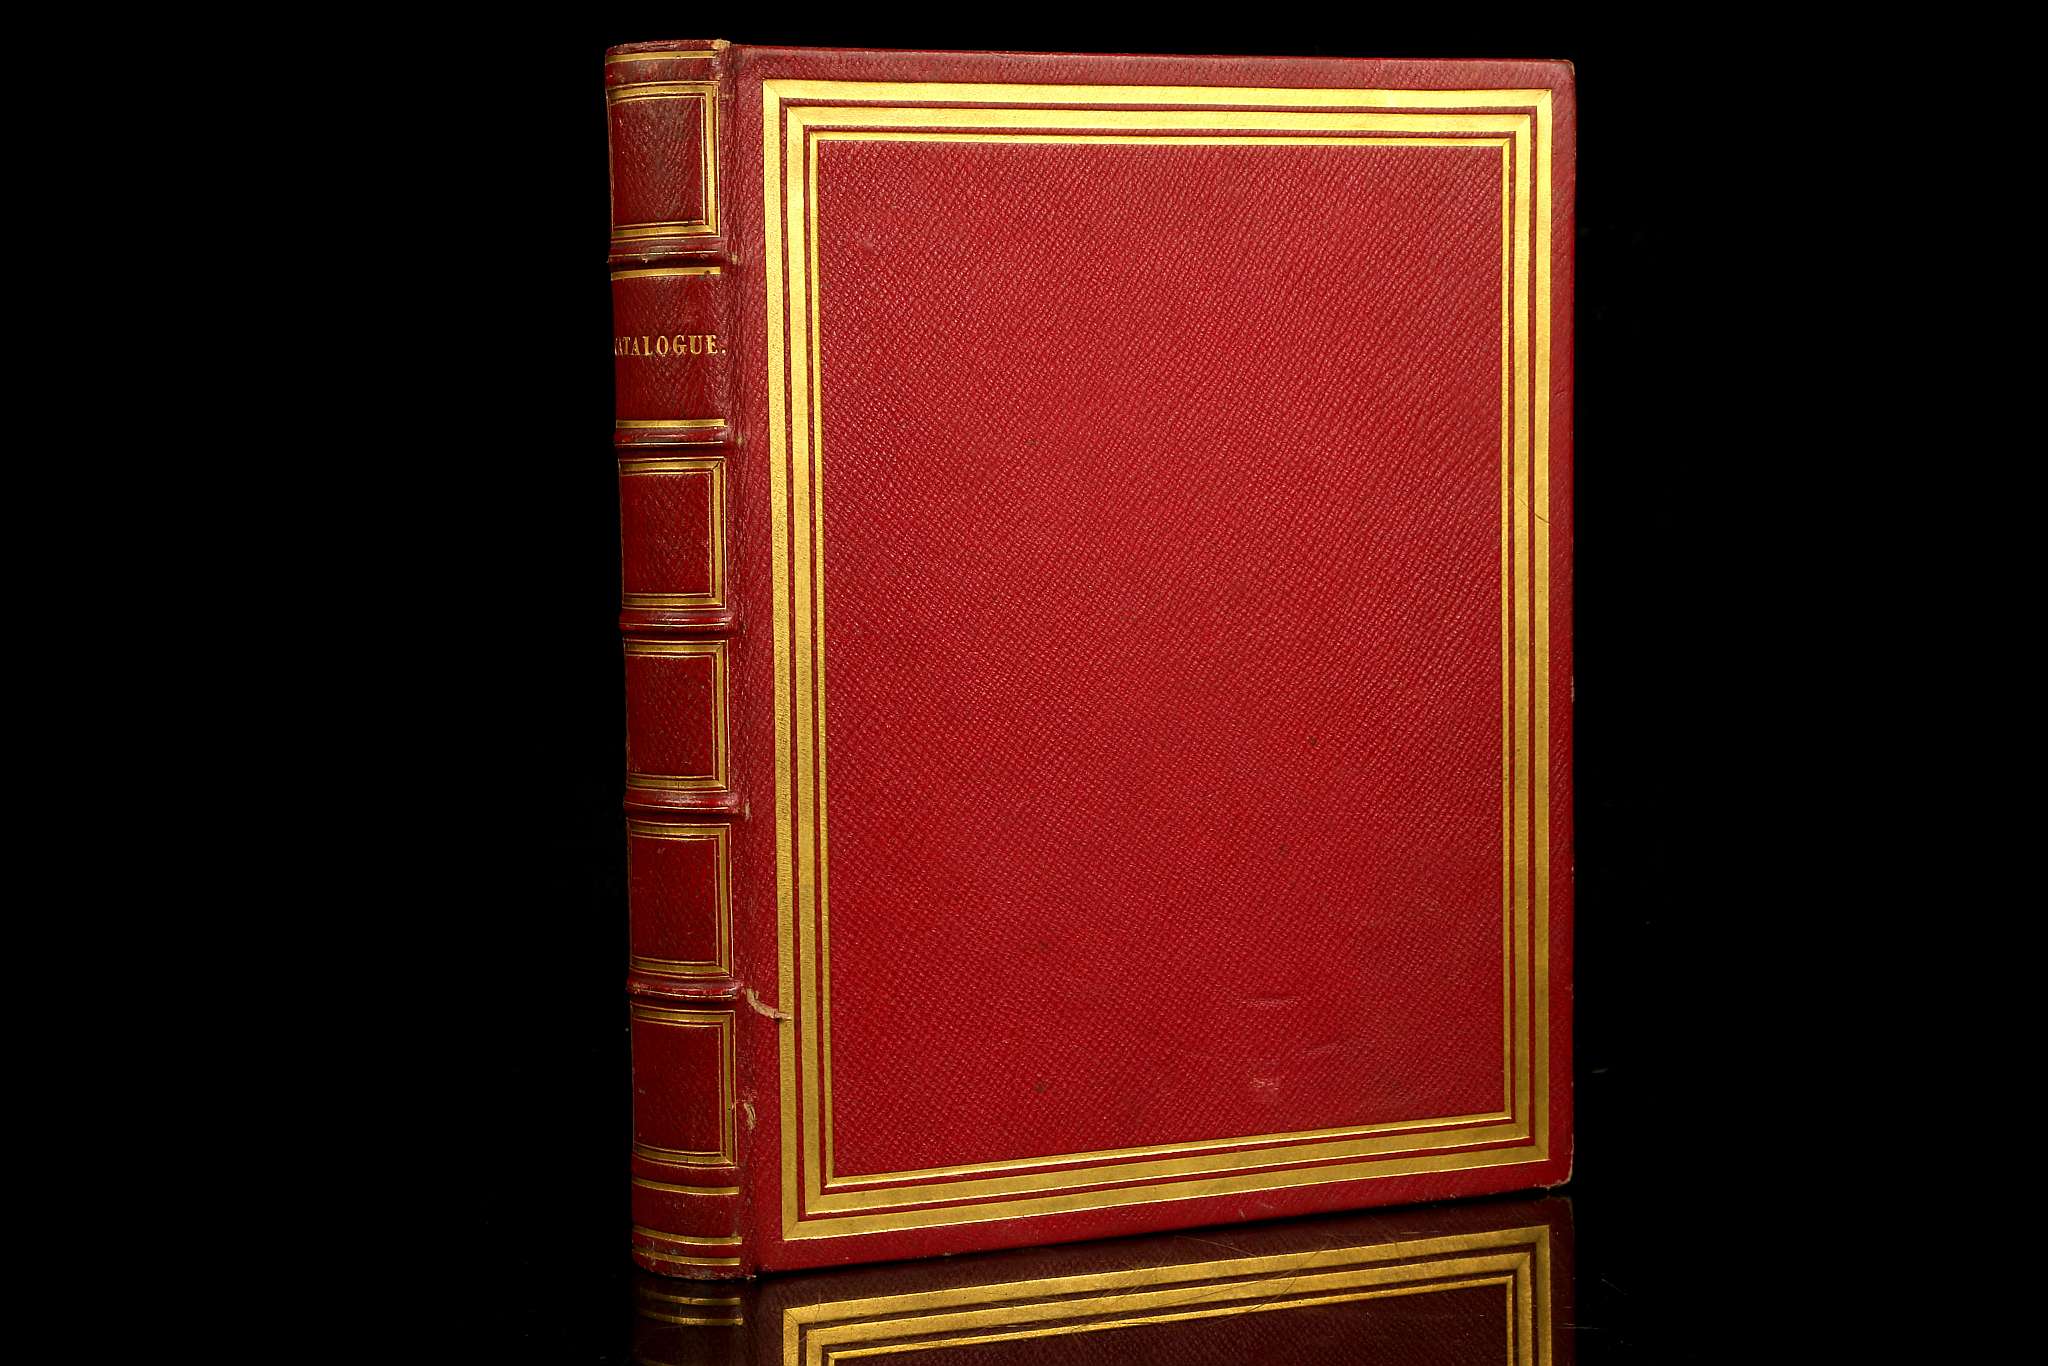 MS. A Catalogue of the Library of the Revd: R:d Harrington. 1835. 4to. Containing an inventory of